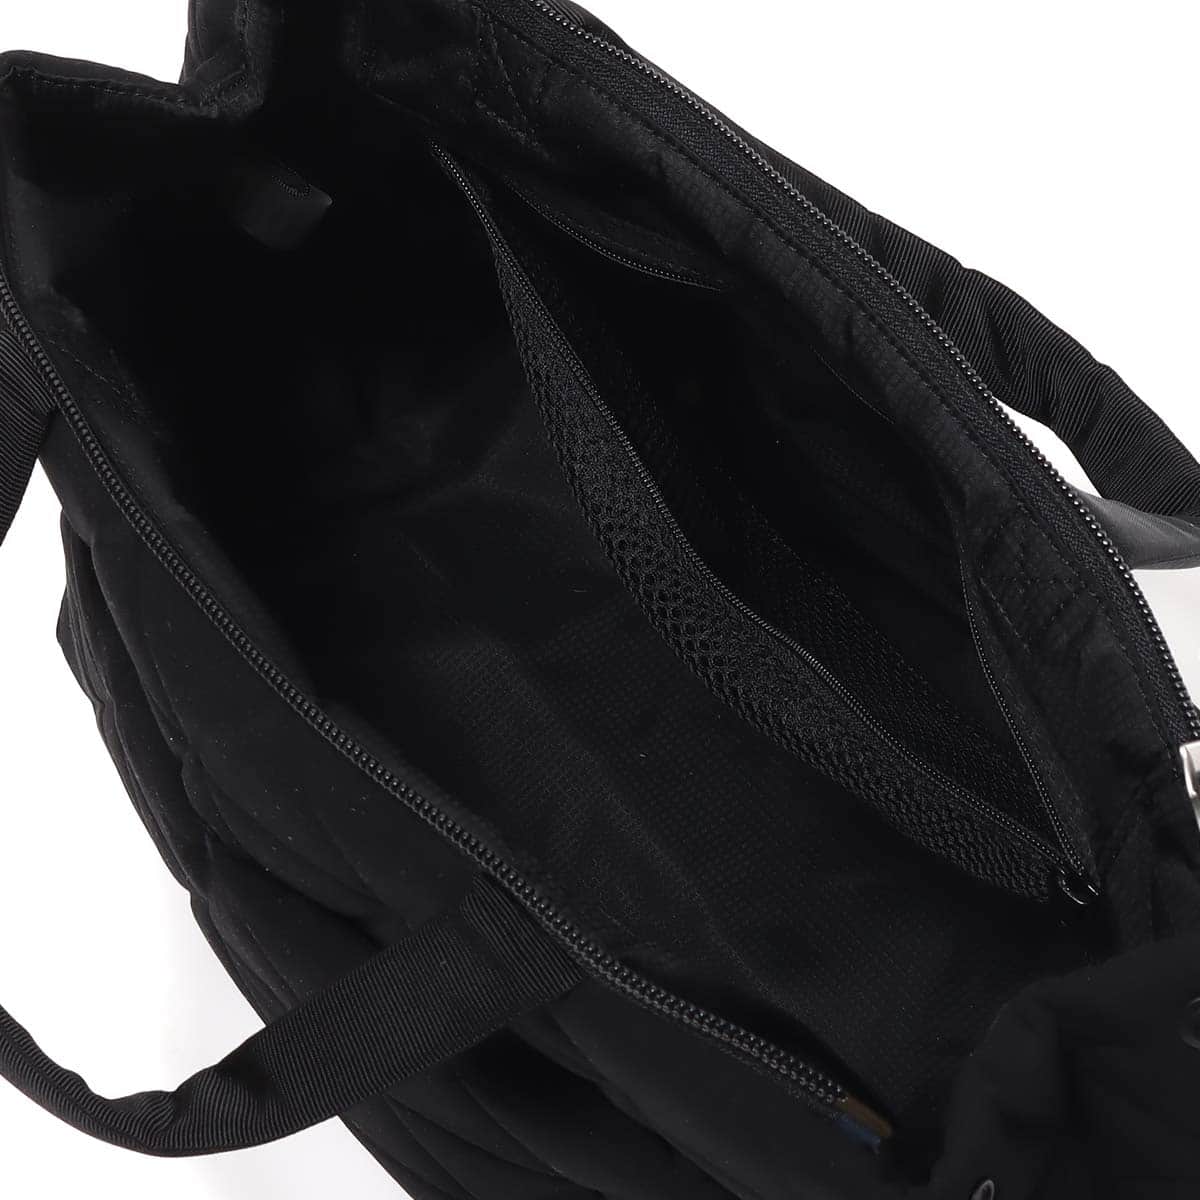 THE NORTH FACE GEOFACE BOX TOTE BLACK 23SS-I